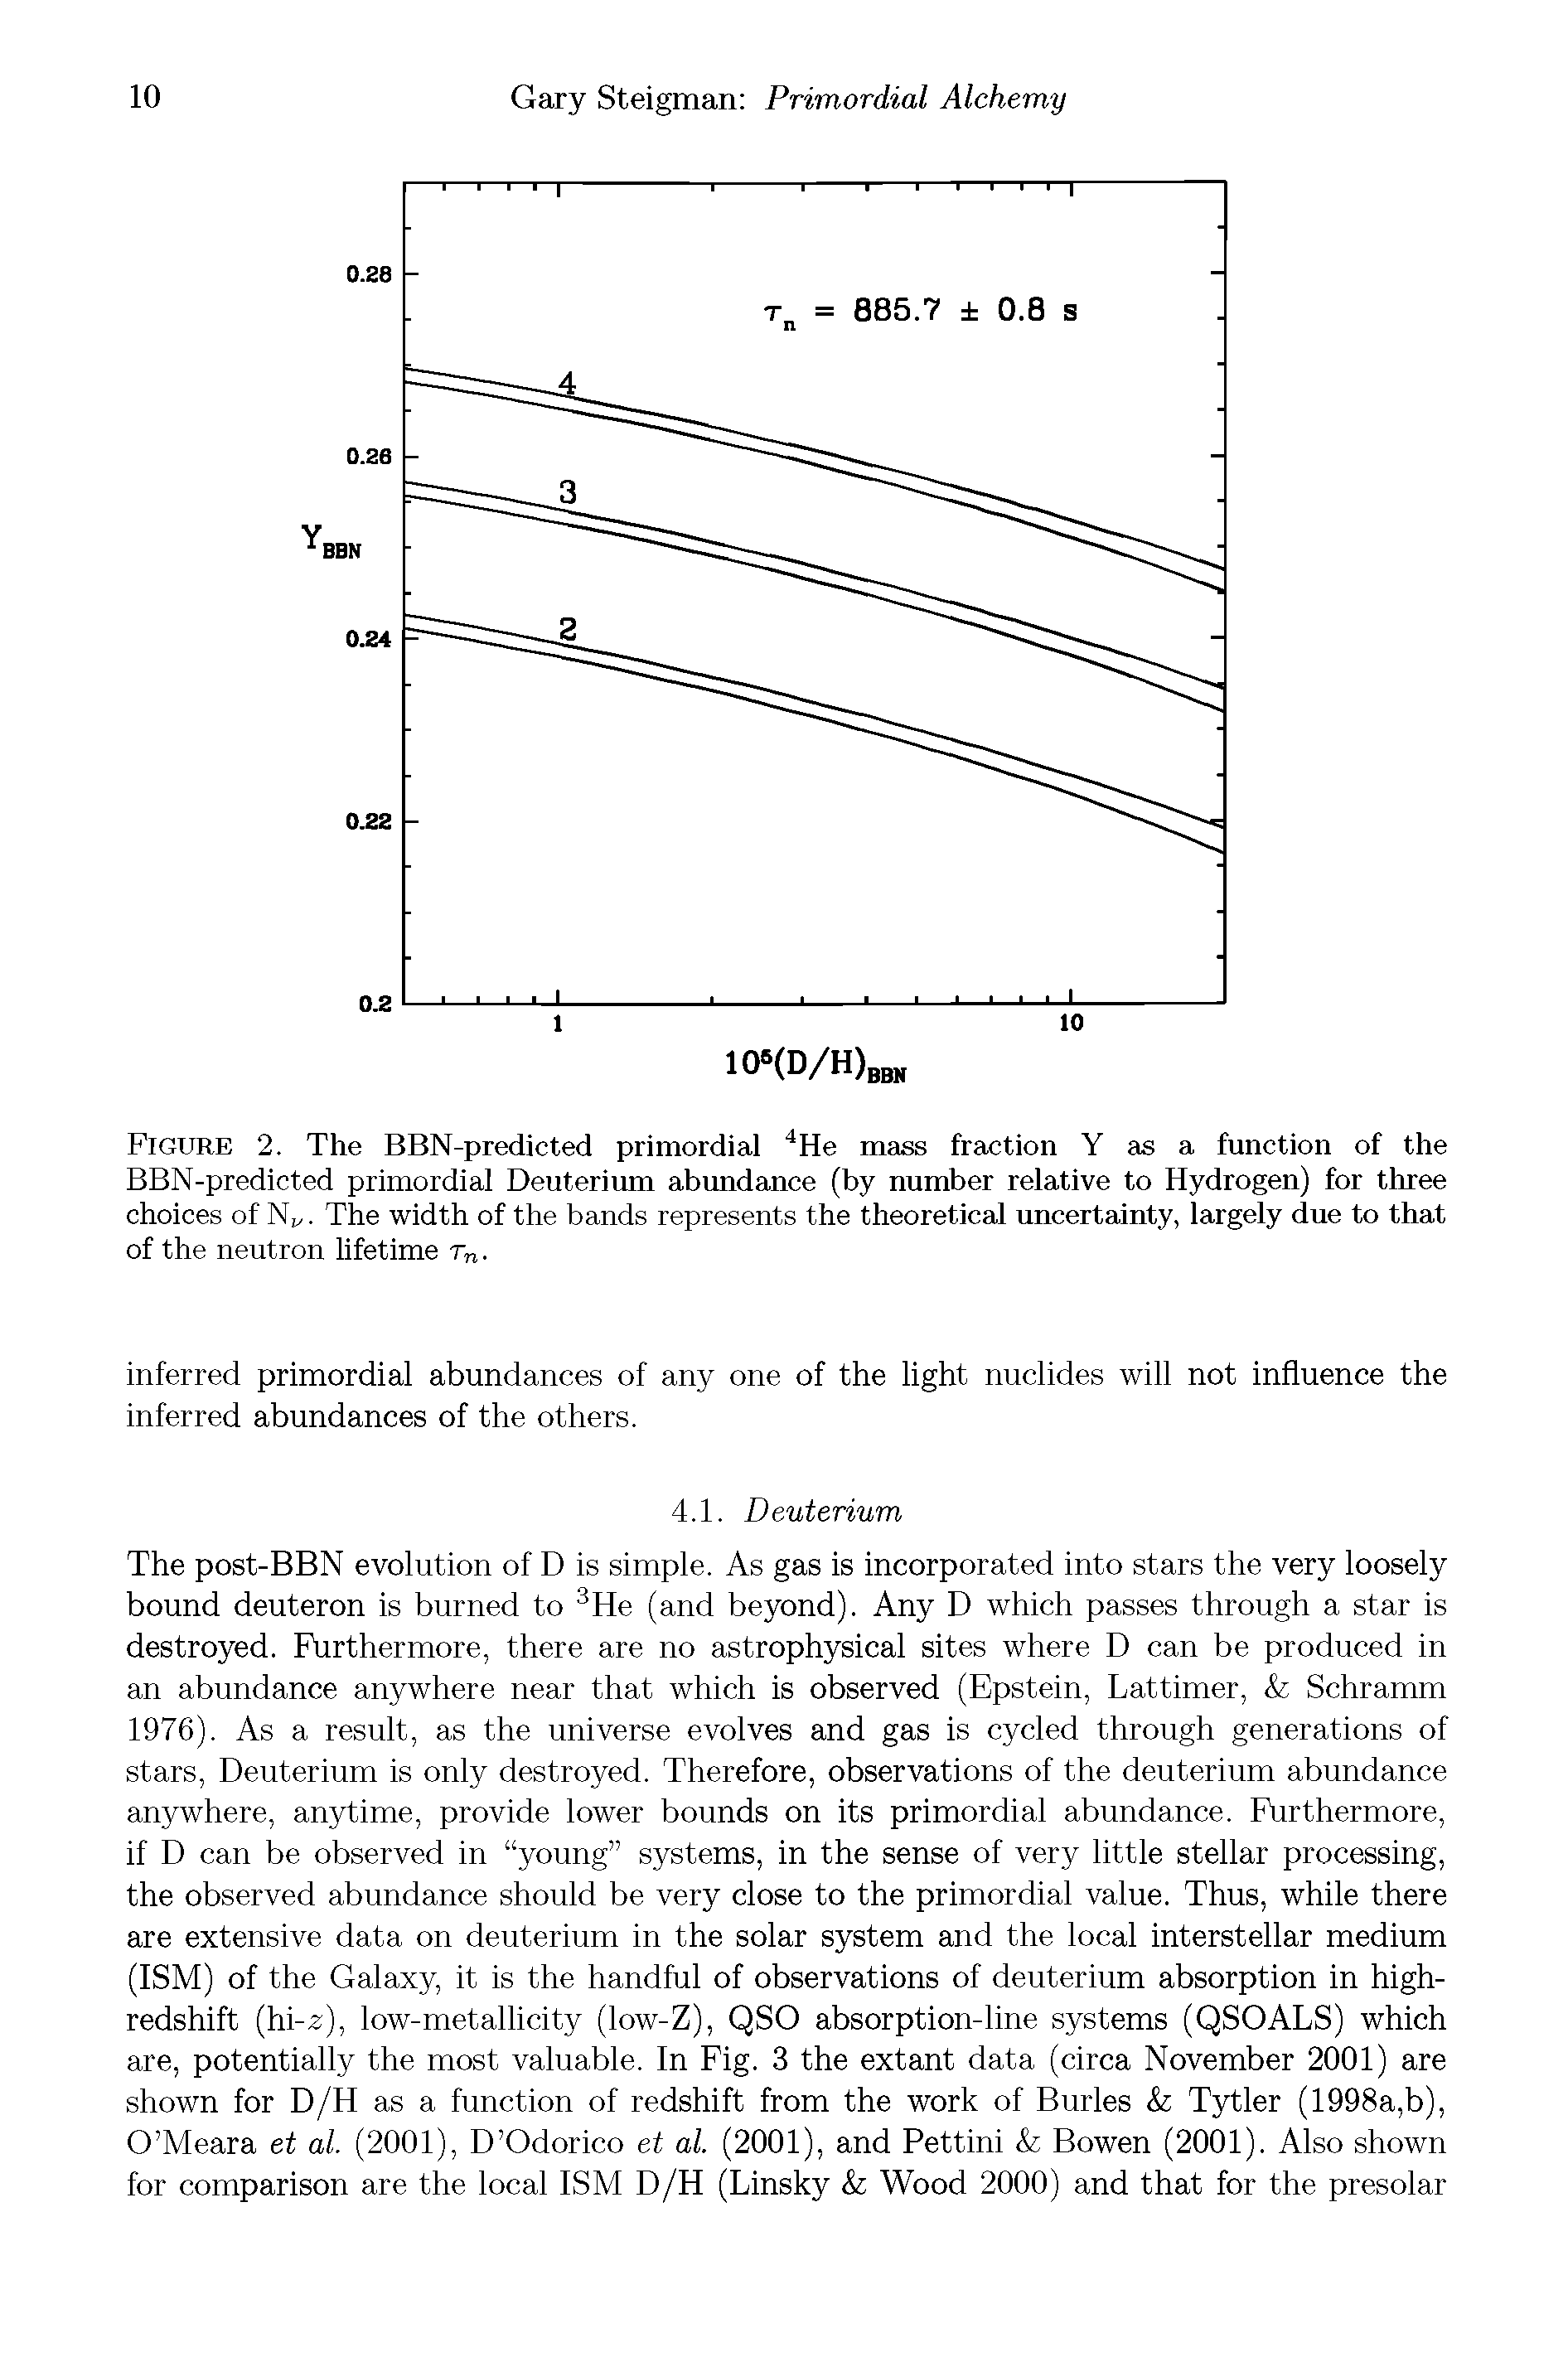 Figure 2. The BBN-predicted primordial 4He mass fraction Y as a function of the BBN-predicted primordial Deuterium abundance (by number relative to Hydrogen) for three choices of N . The width of the bands represents the theoretical uncertainty, largely due to that of the neutron lifetime rn.